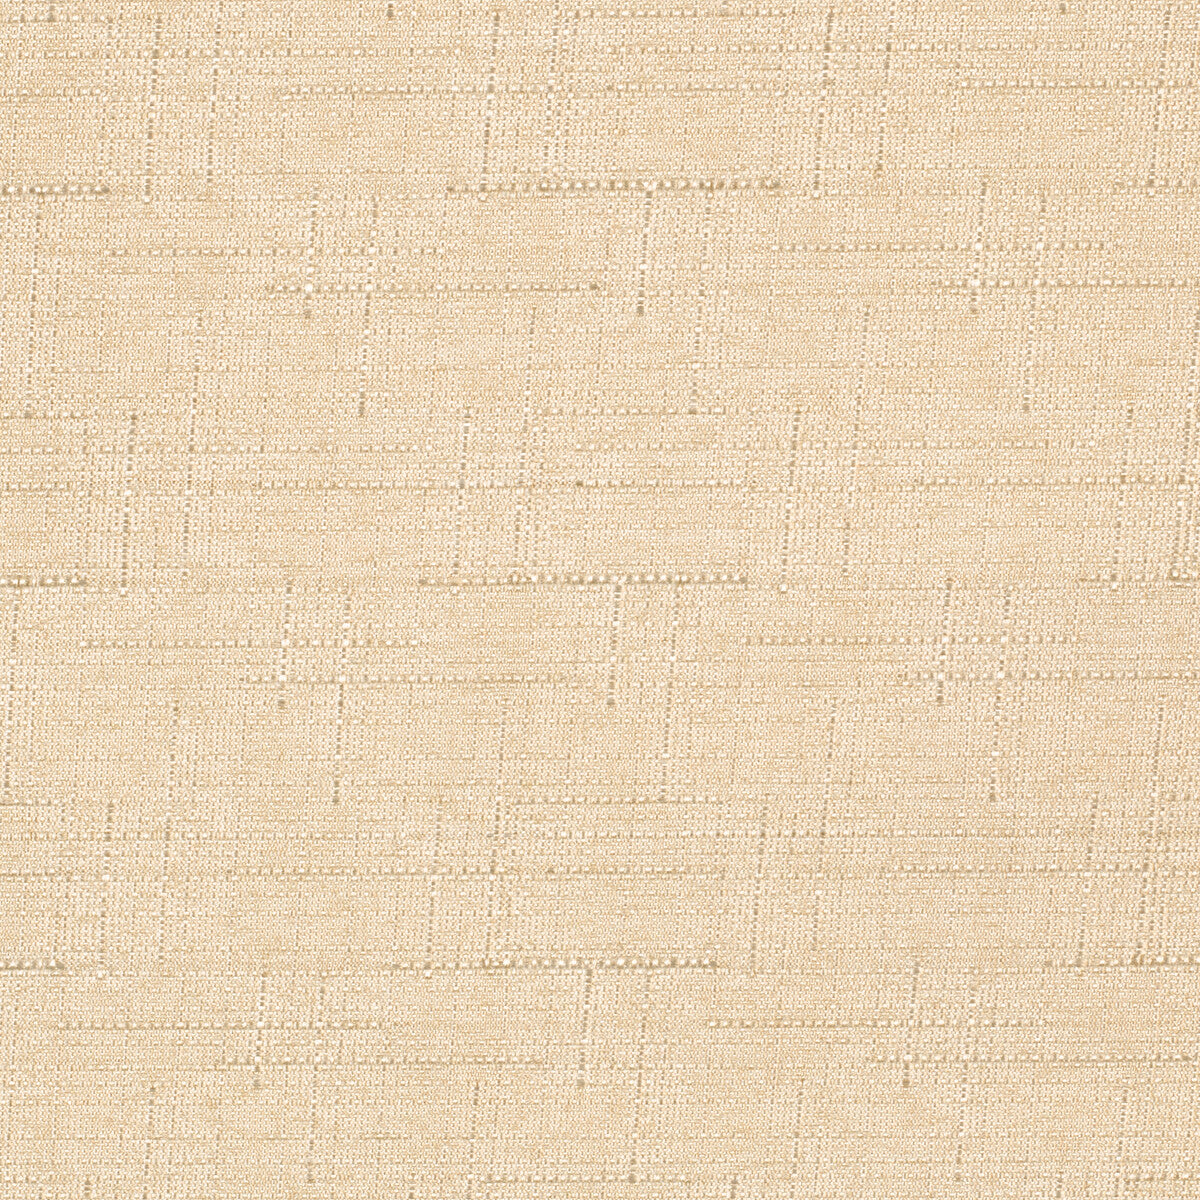 Kravet Contract fabric in 4317-1116 color - pattern 4317.1116.0 - by Kravet Contract